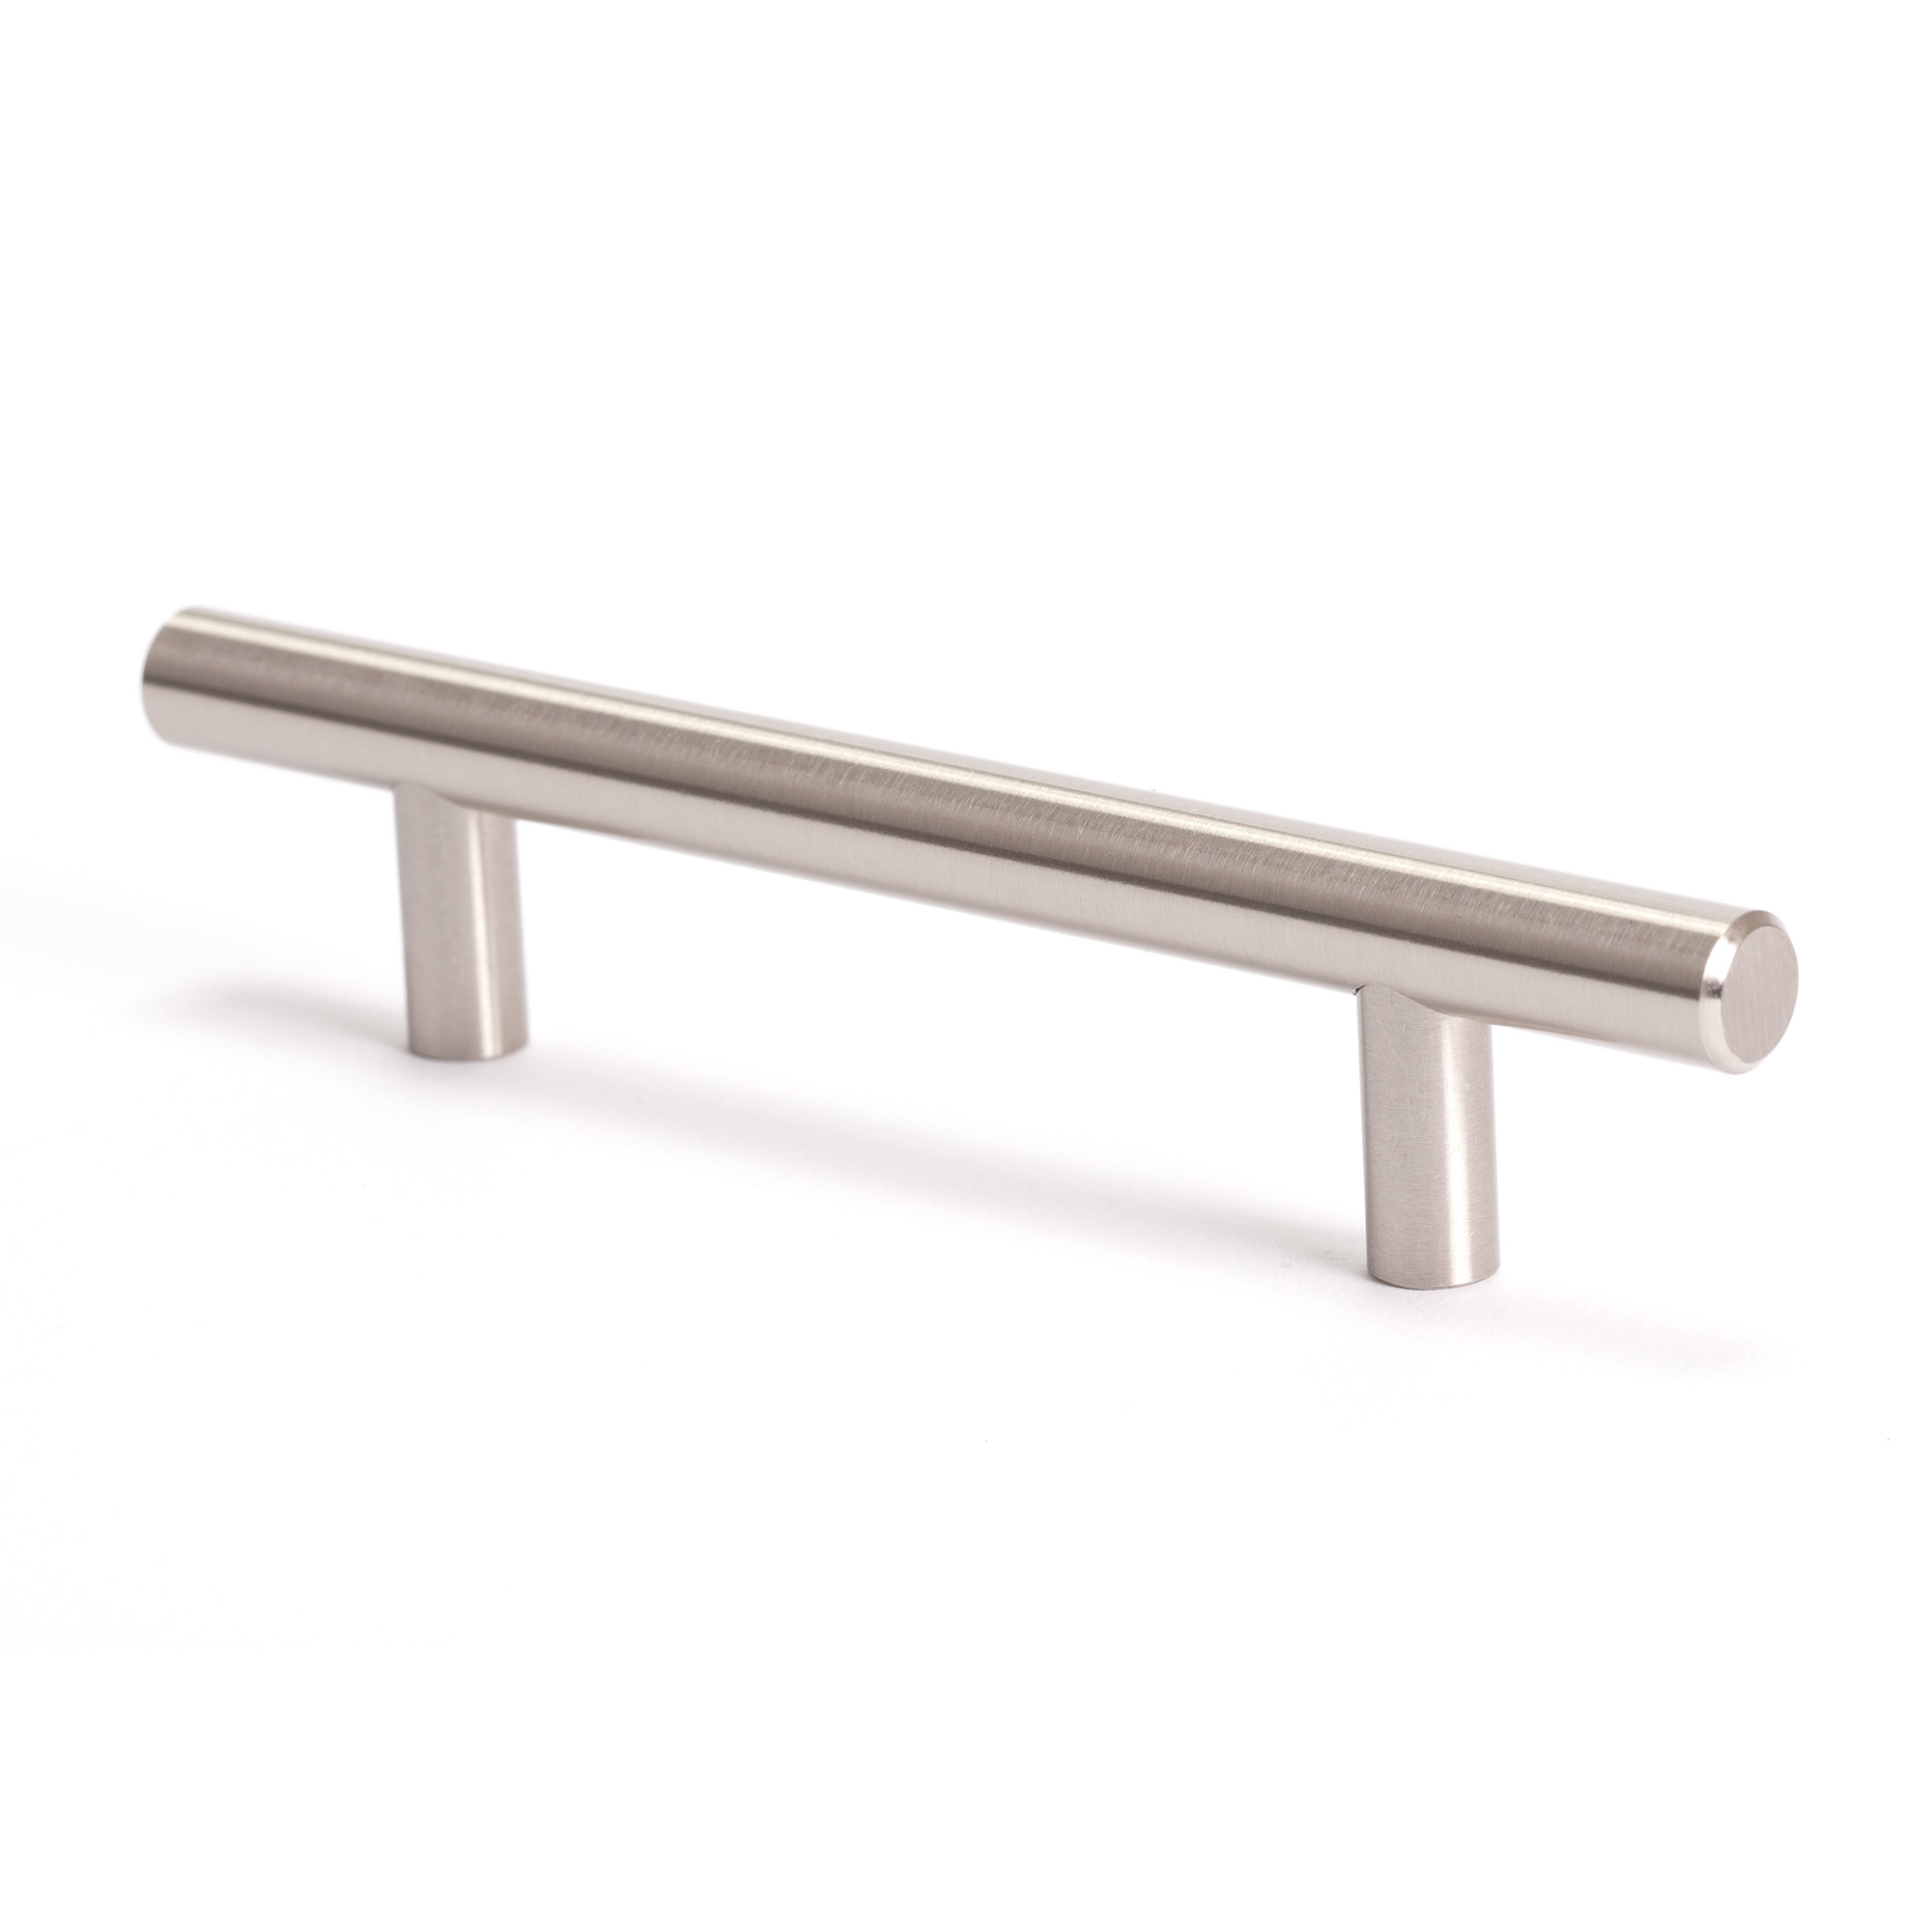 Advantage Plus 2 5-3/8" Pull in Brushed Nickel